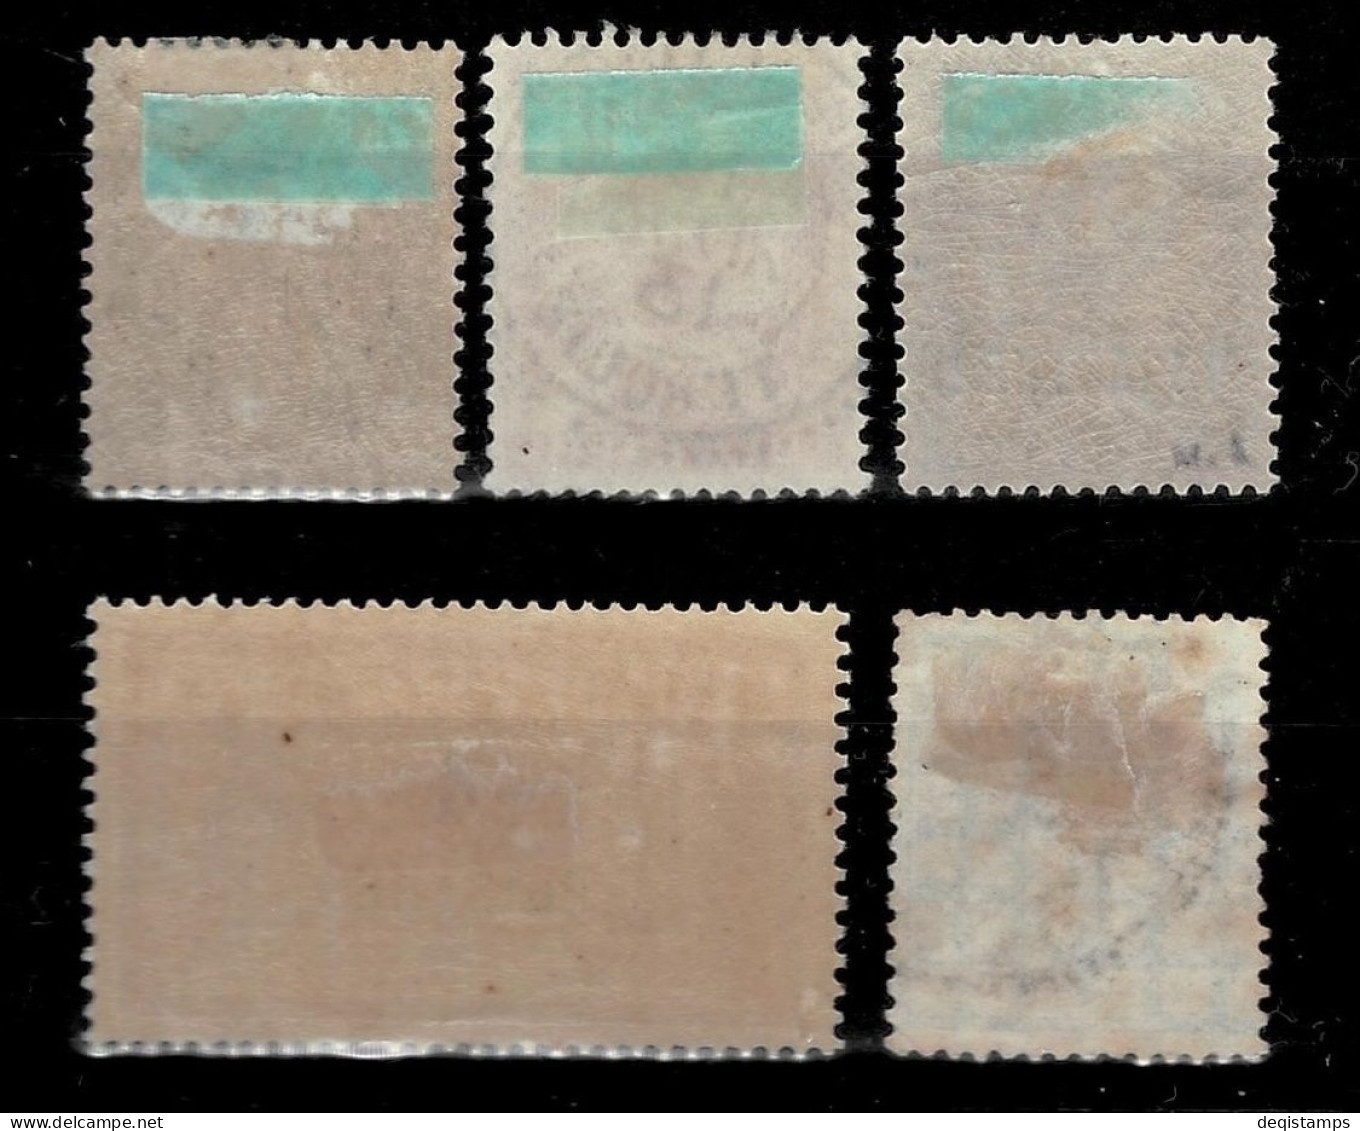 French Levant Dedeagatch Year 1893/1900 MH/Used Stamps - Ongebruikt